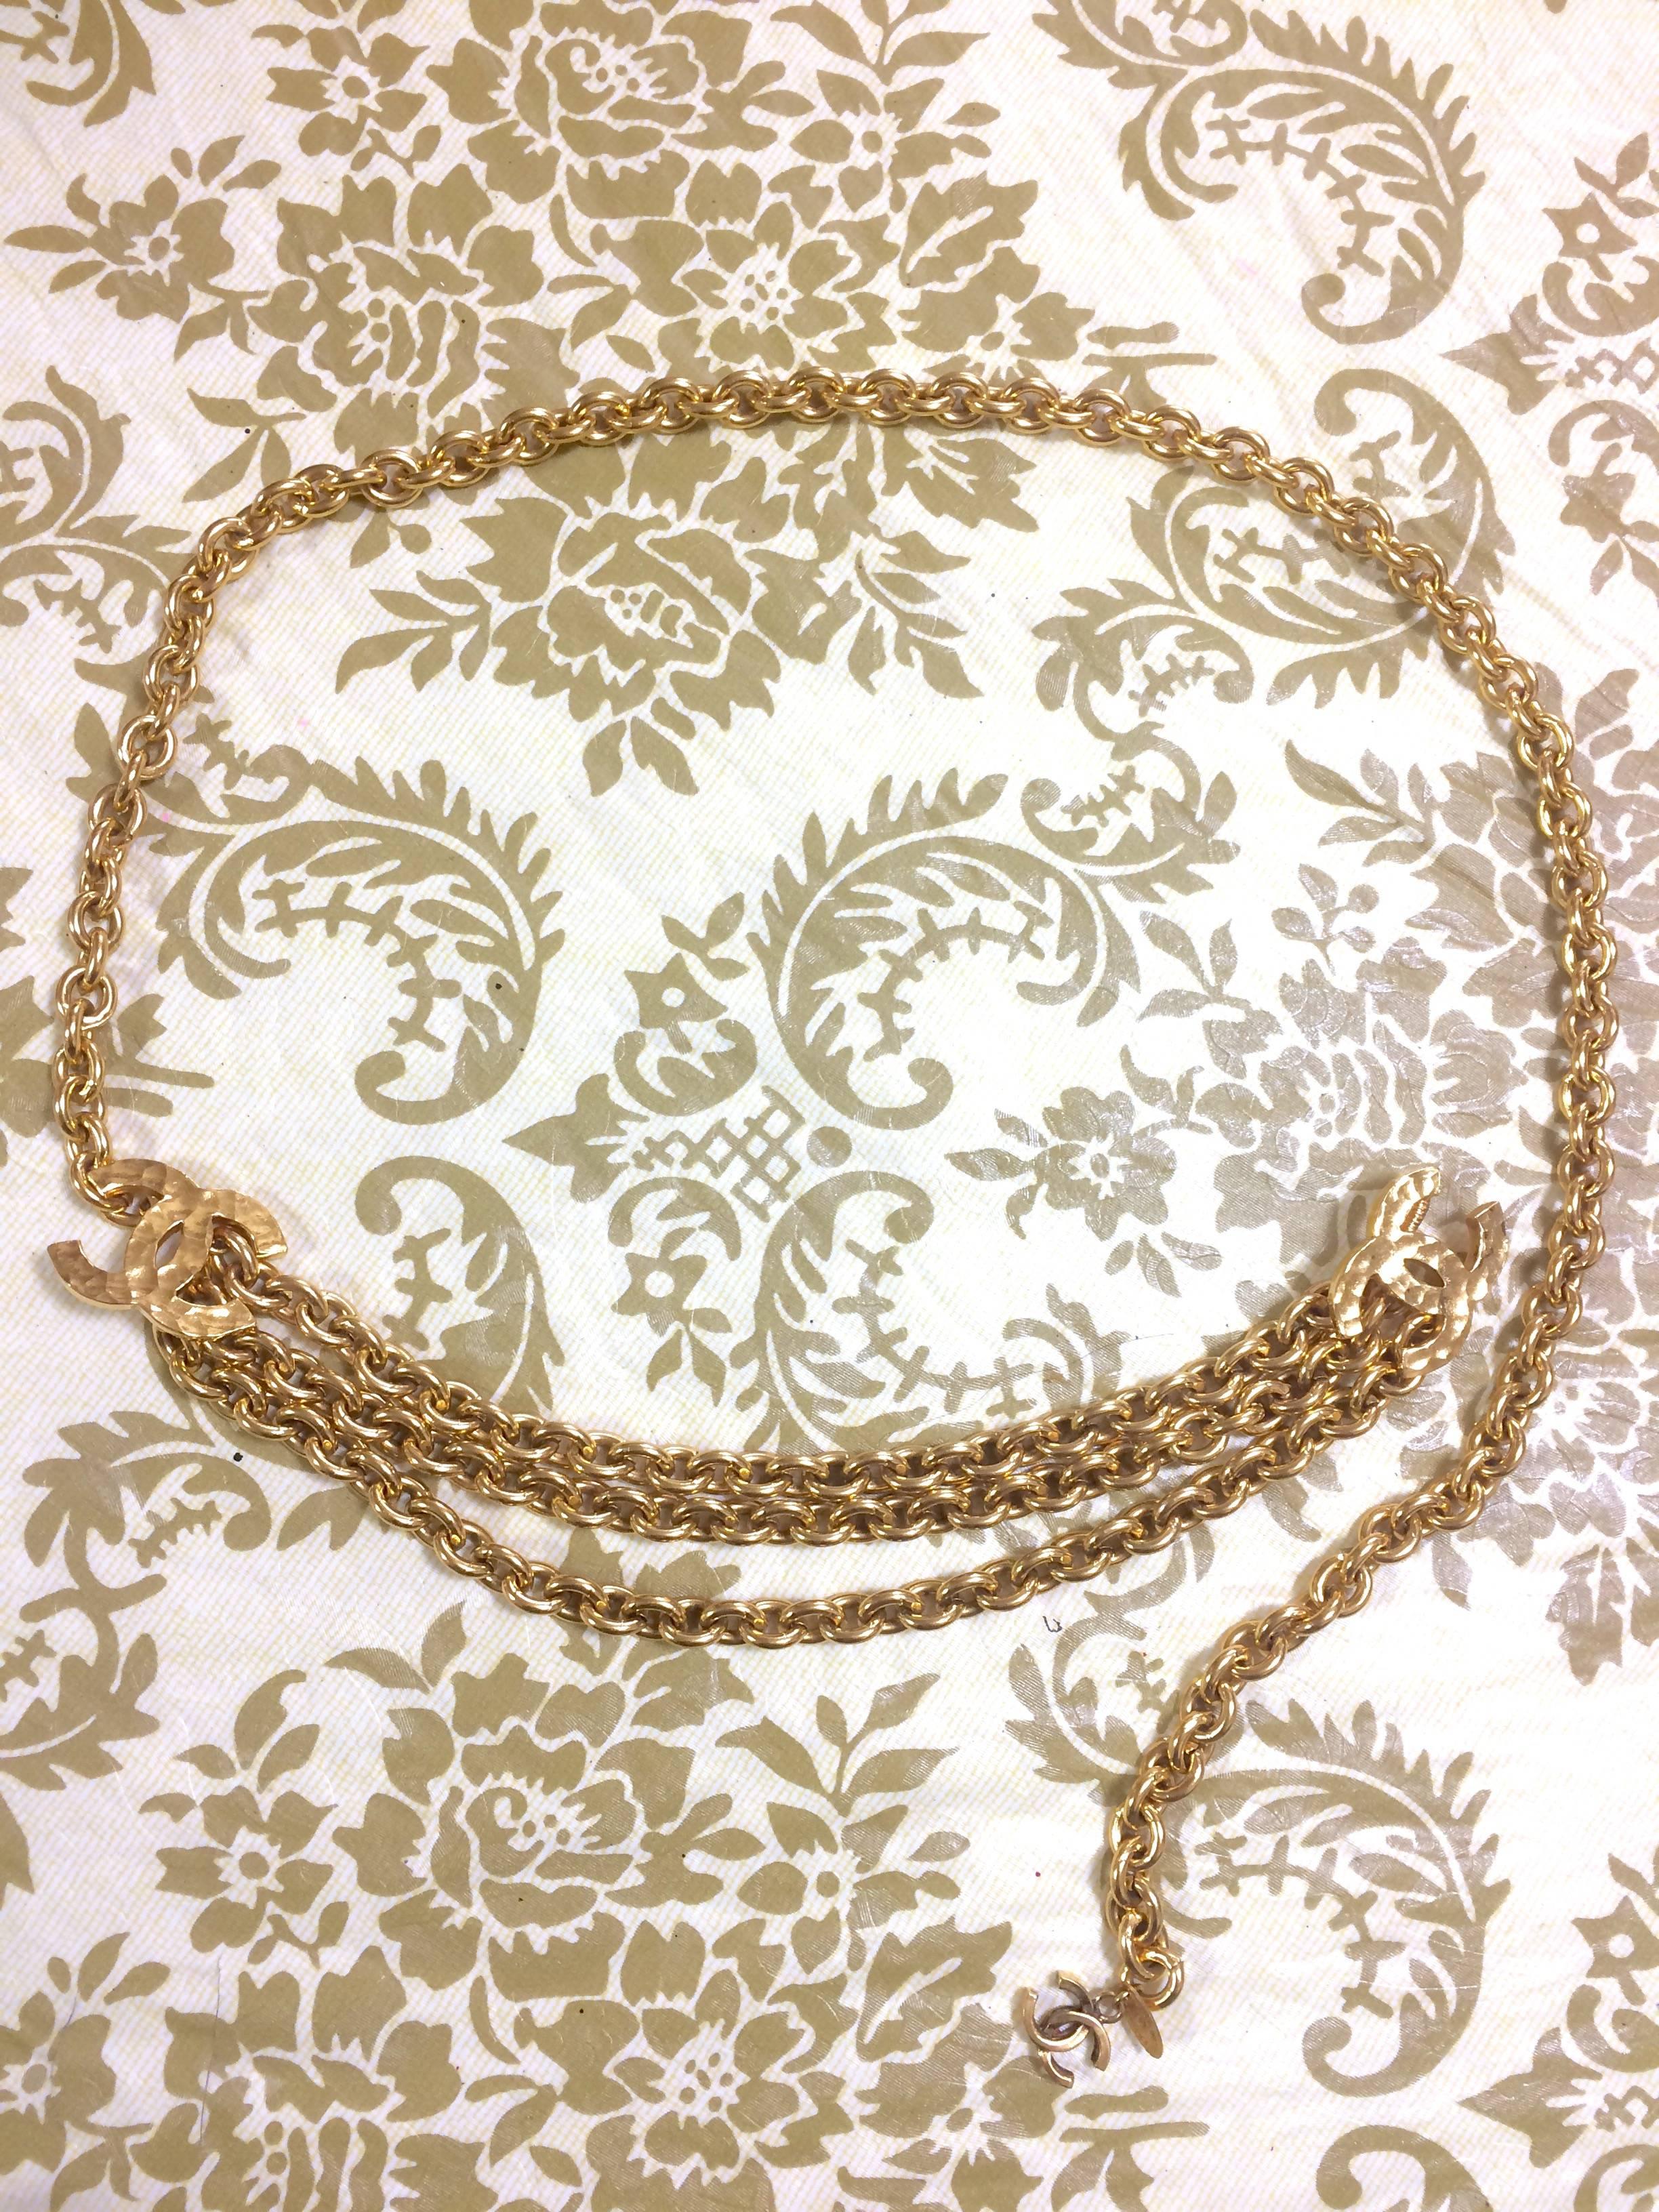 1980s. MINT/Excellent. Vintage CHANEL golden chain belt with triple layer chains and two large CC mark charms at sides. Rare and Gorgeous belt. Perfect Chanel gift.

MINT/excellent vintage condition...
Introducing another Chanel classic vintage